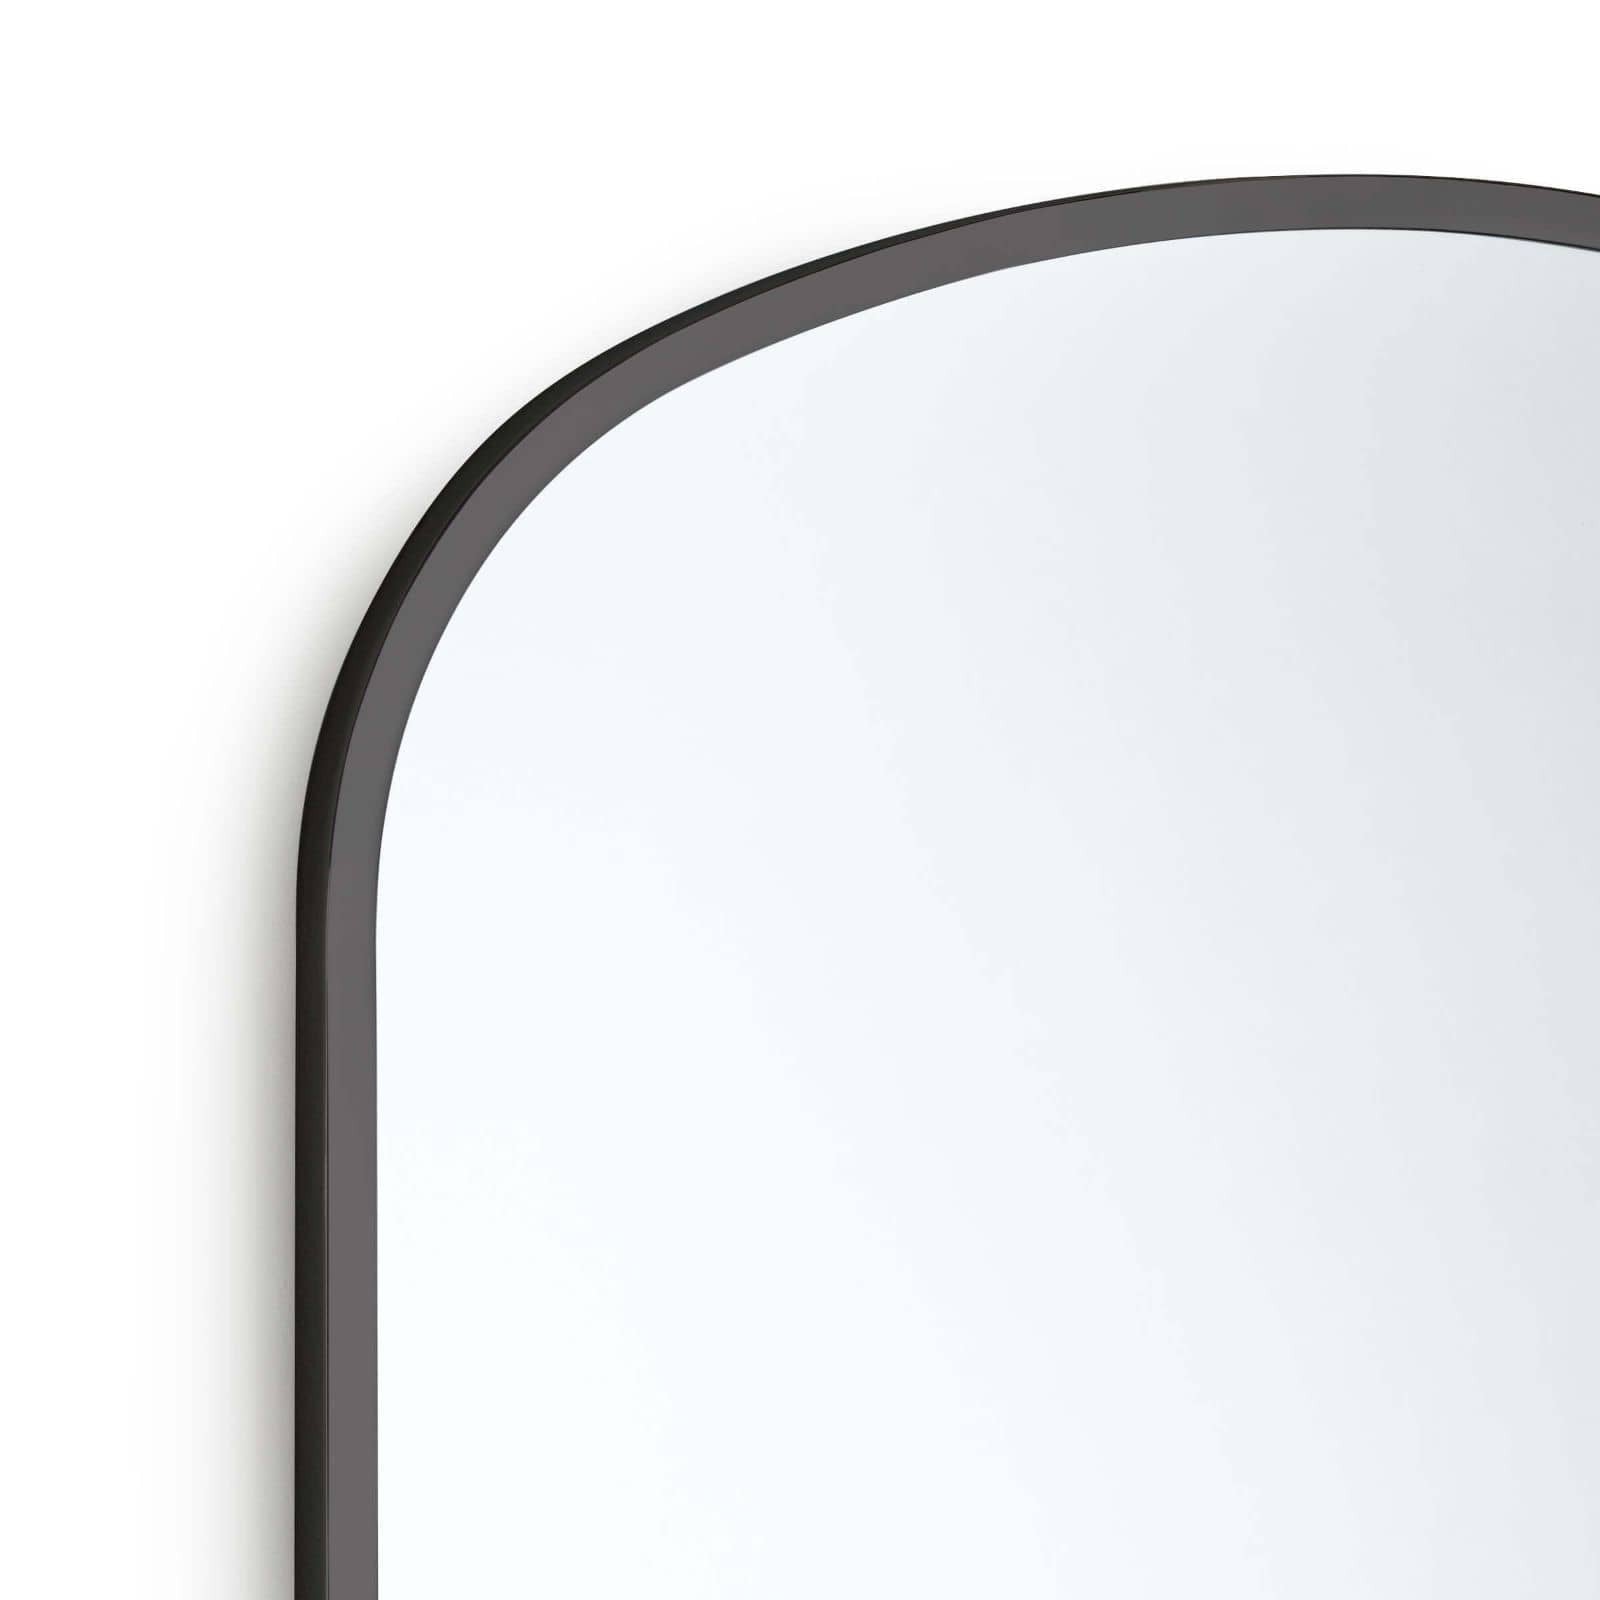 We love the arched metal frame of this Cloak Mirror. Place in your entryway, living room, or bedroom and bring a sleek, sophisticated look to the space!   Overall Size: 26"w x 0.75"d x 30"h